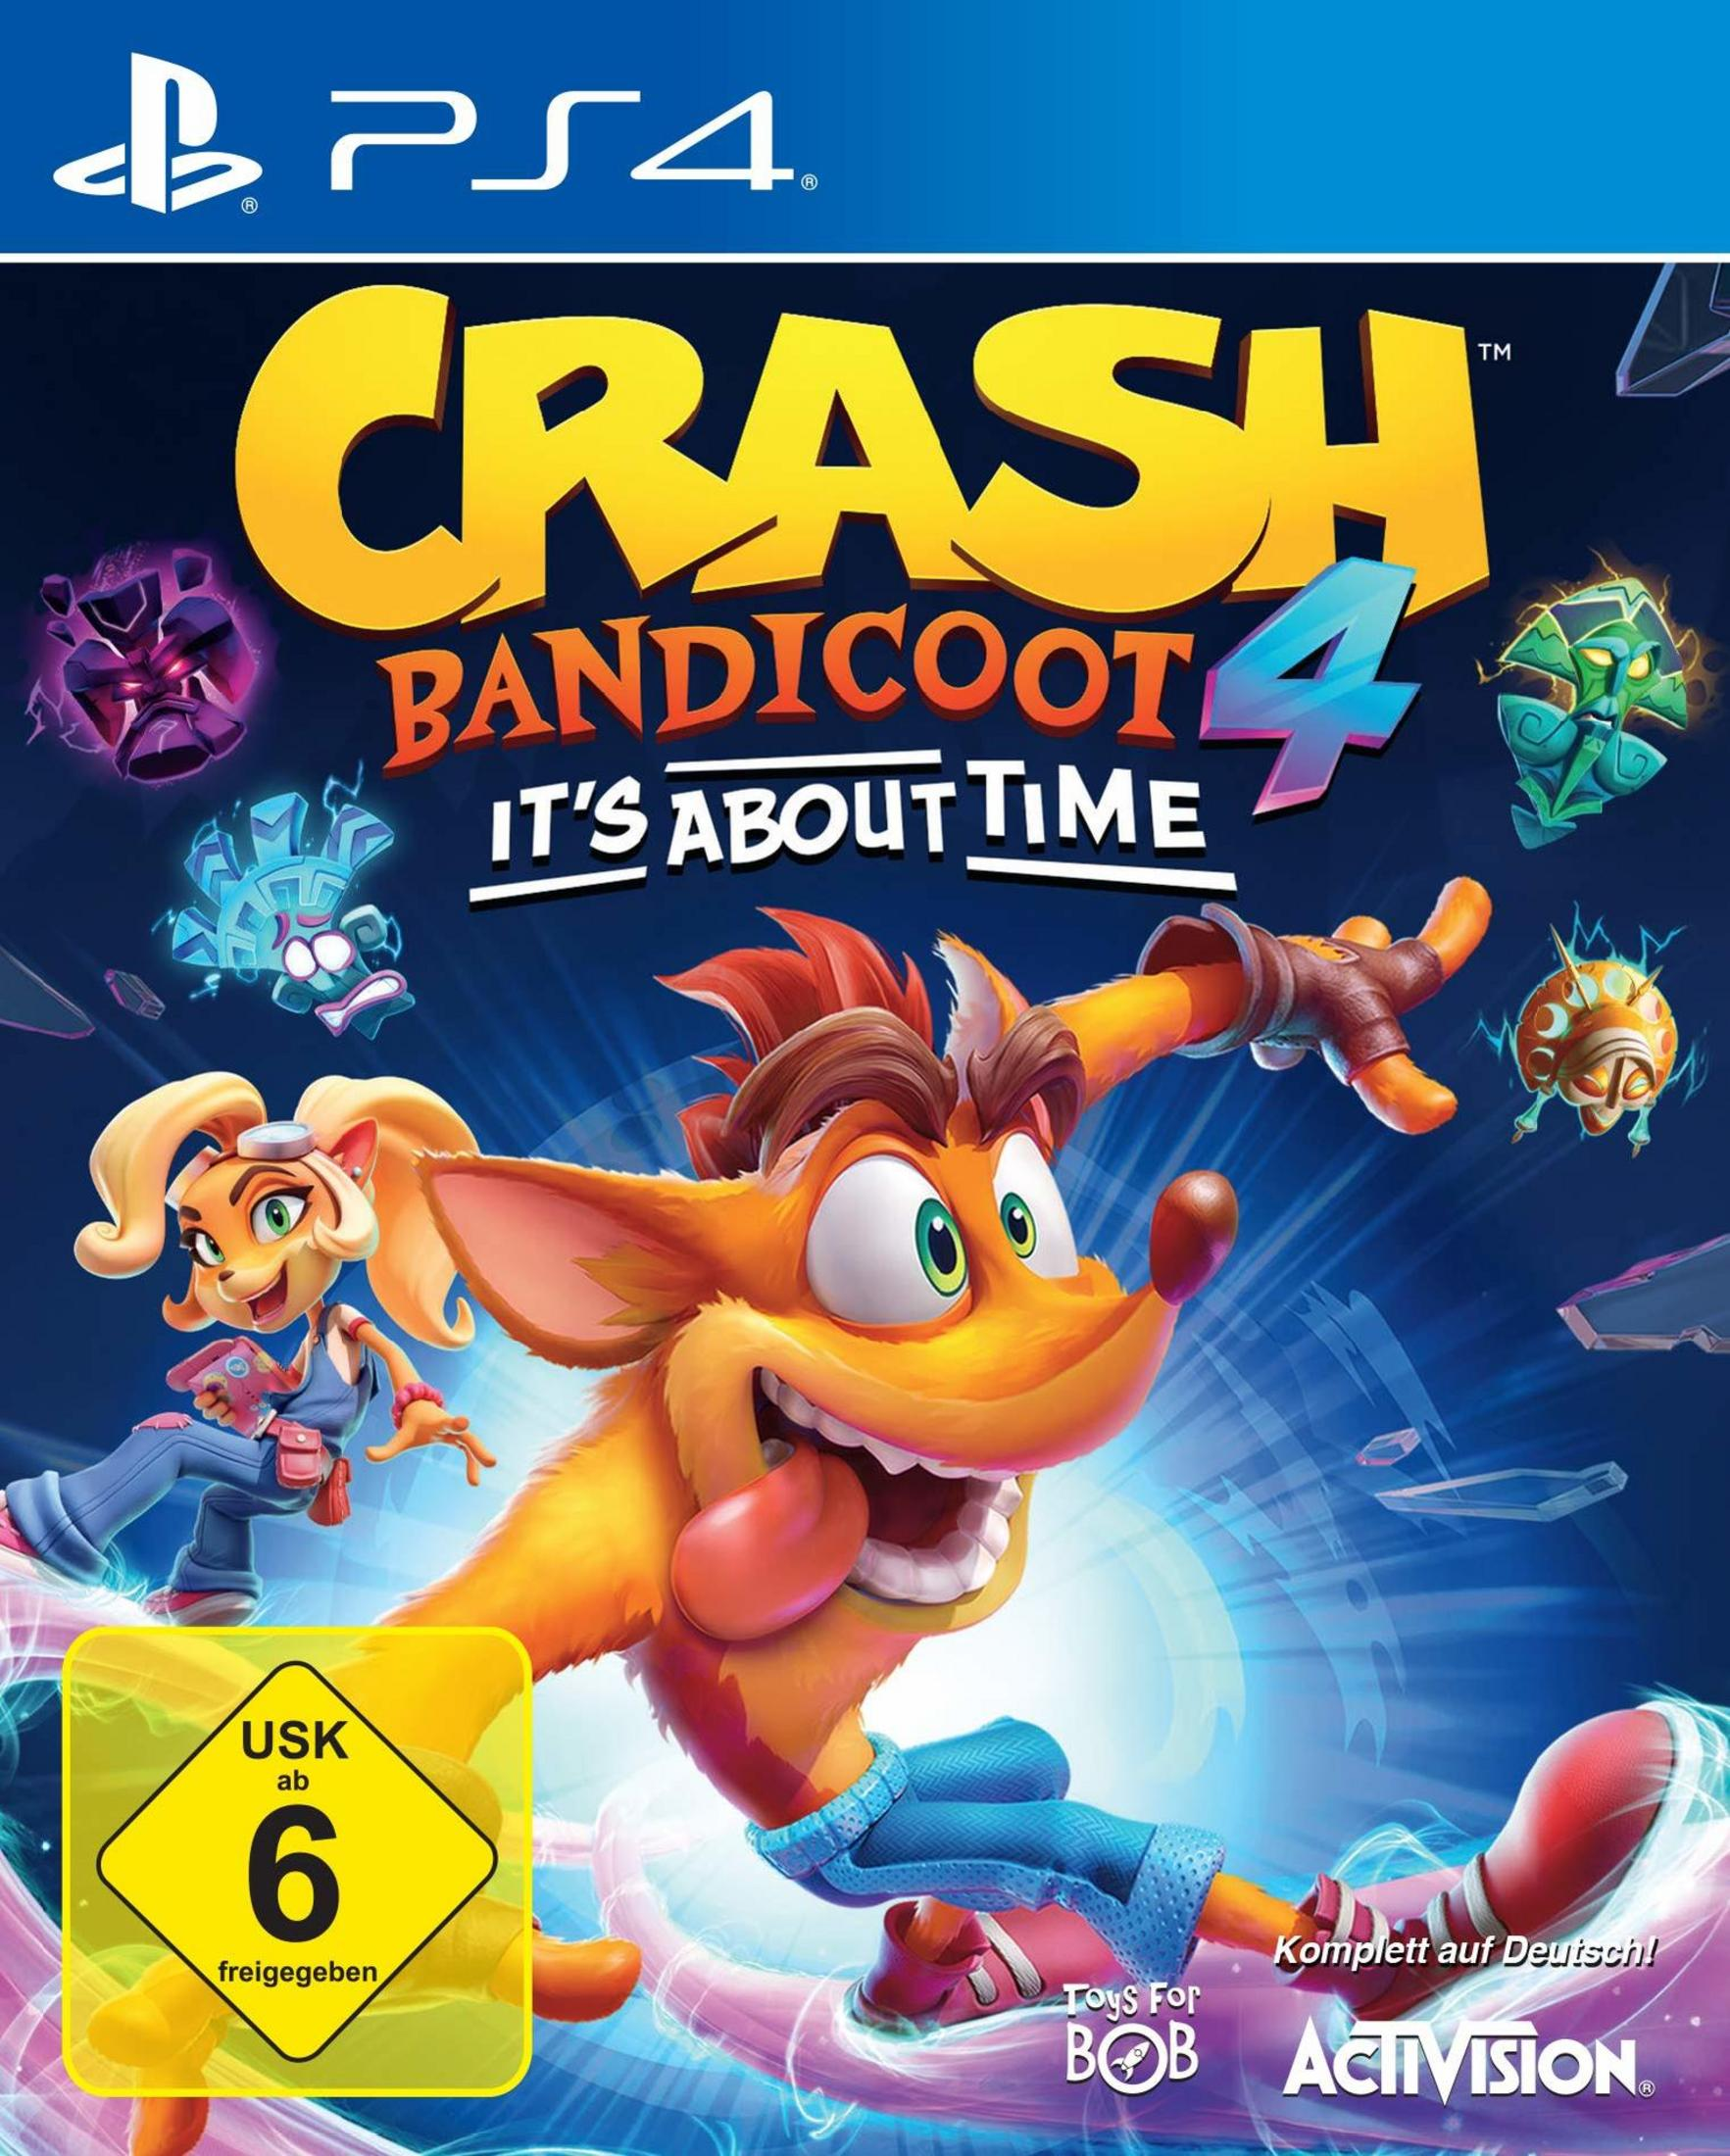 Crash Bandicoot 4 - [PlayStation About - Time It´s 4